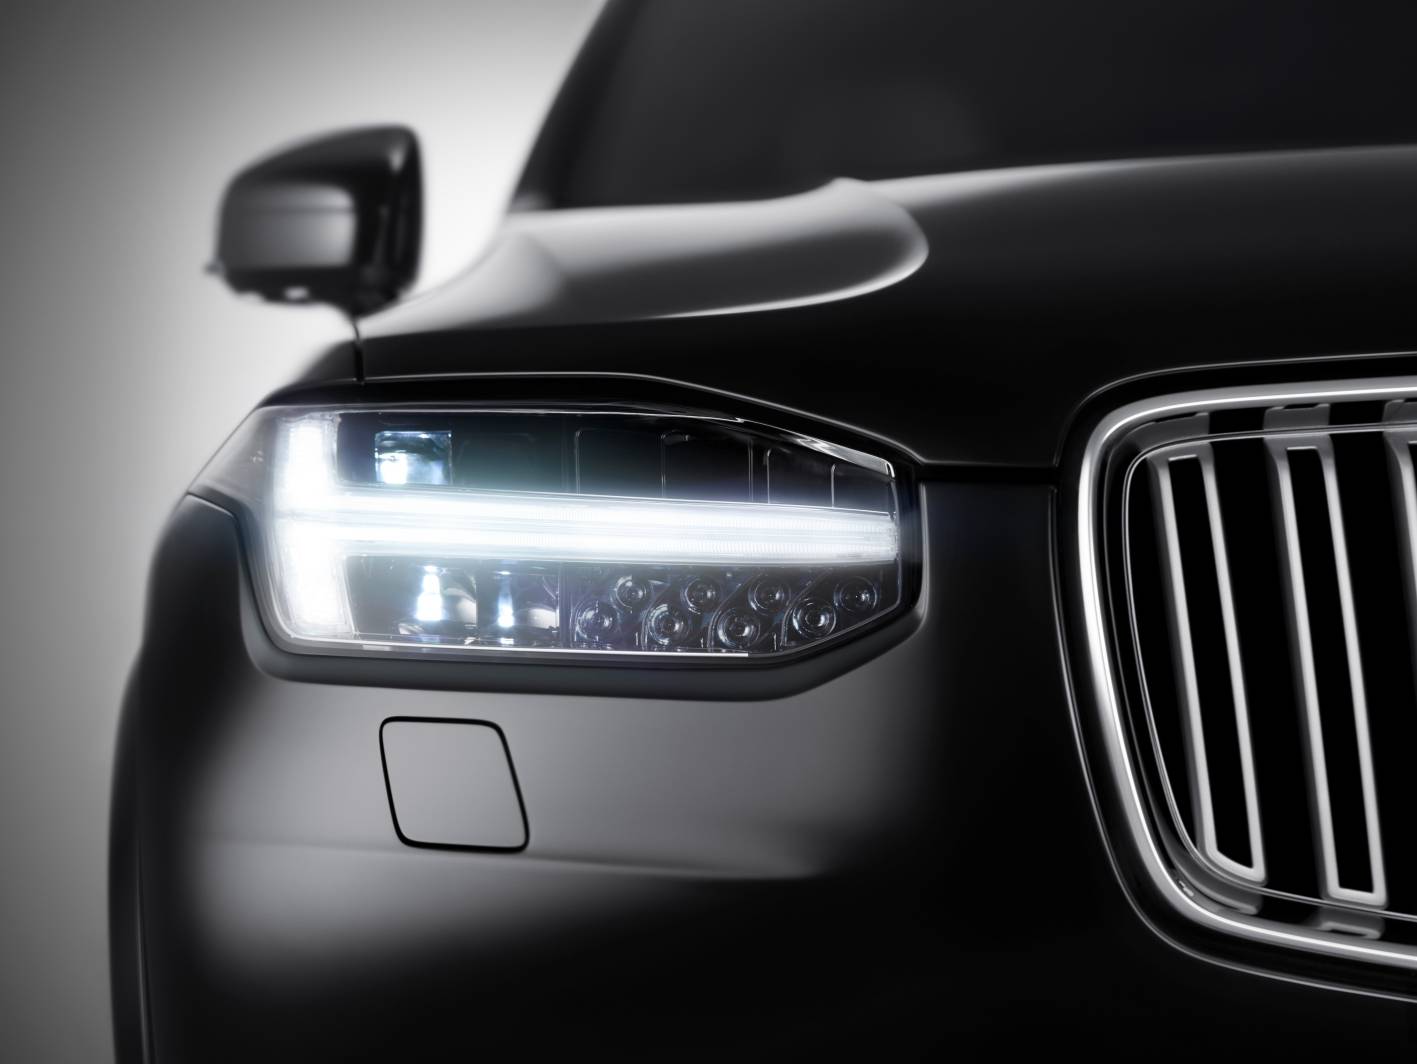 2015 Volvo XC90 features Thor-inspired headlights